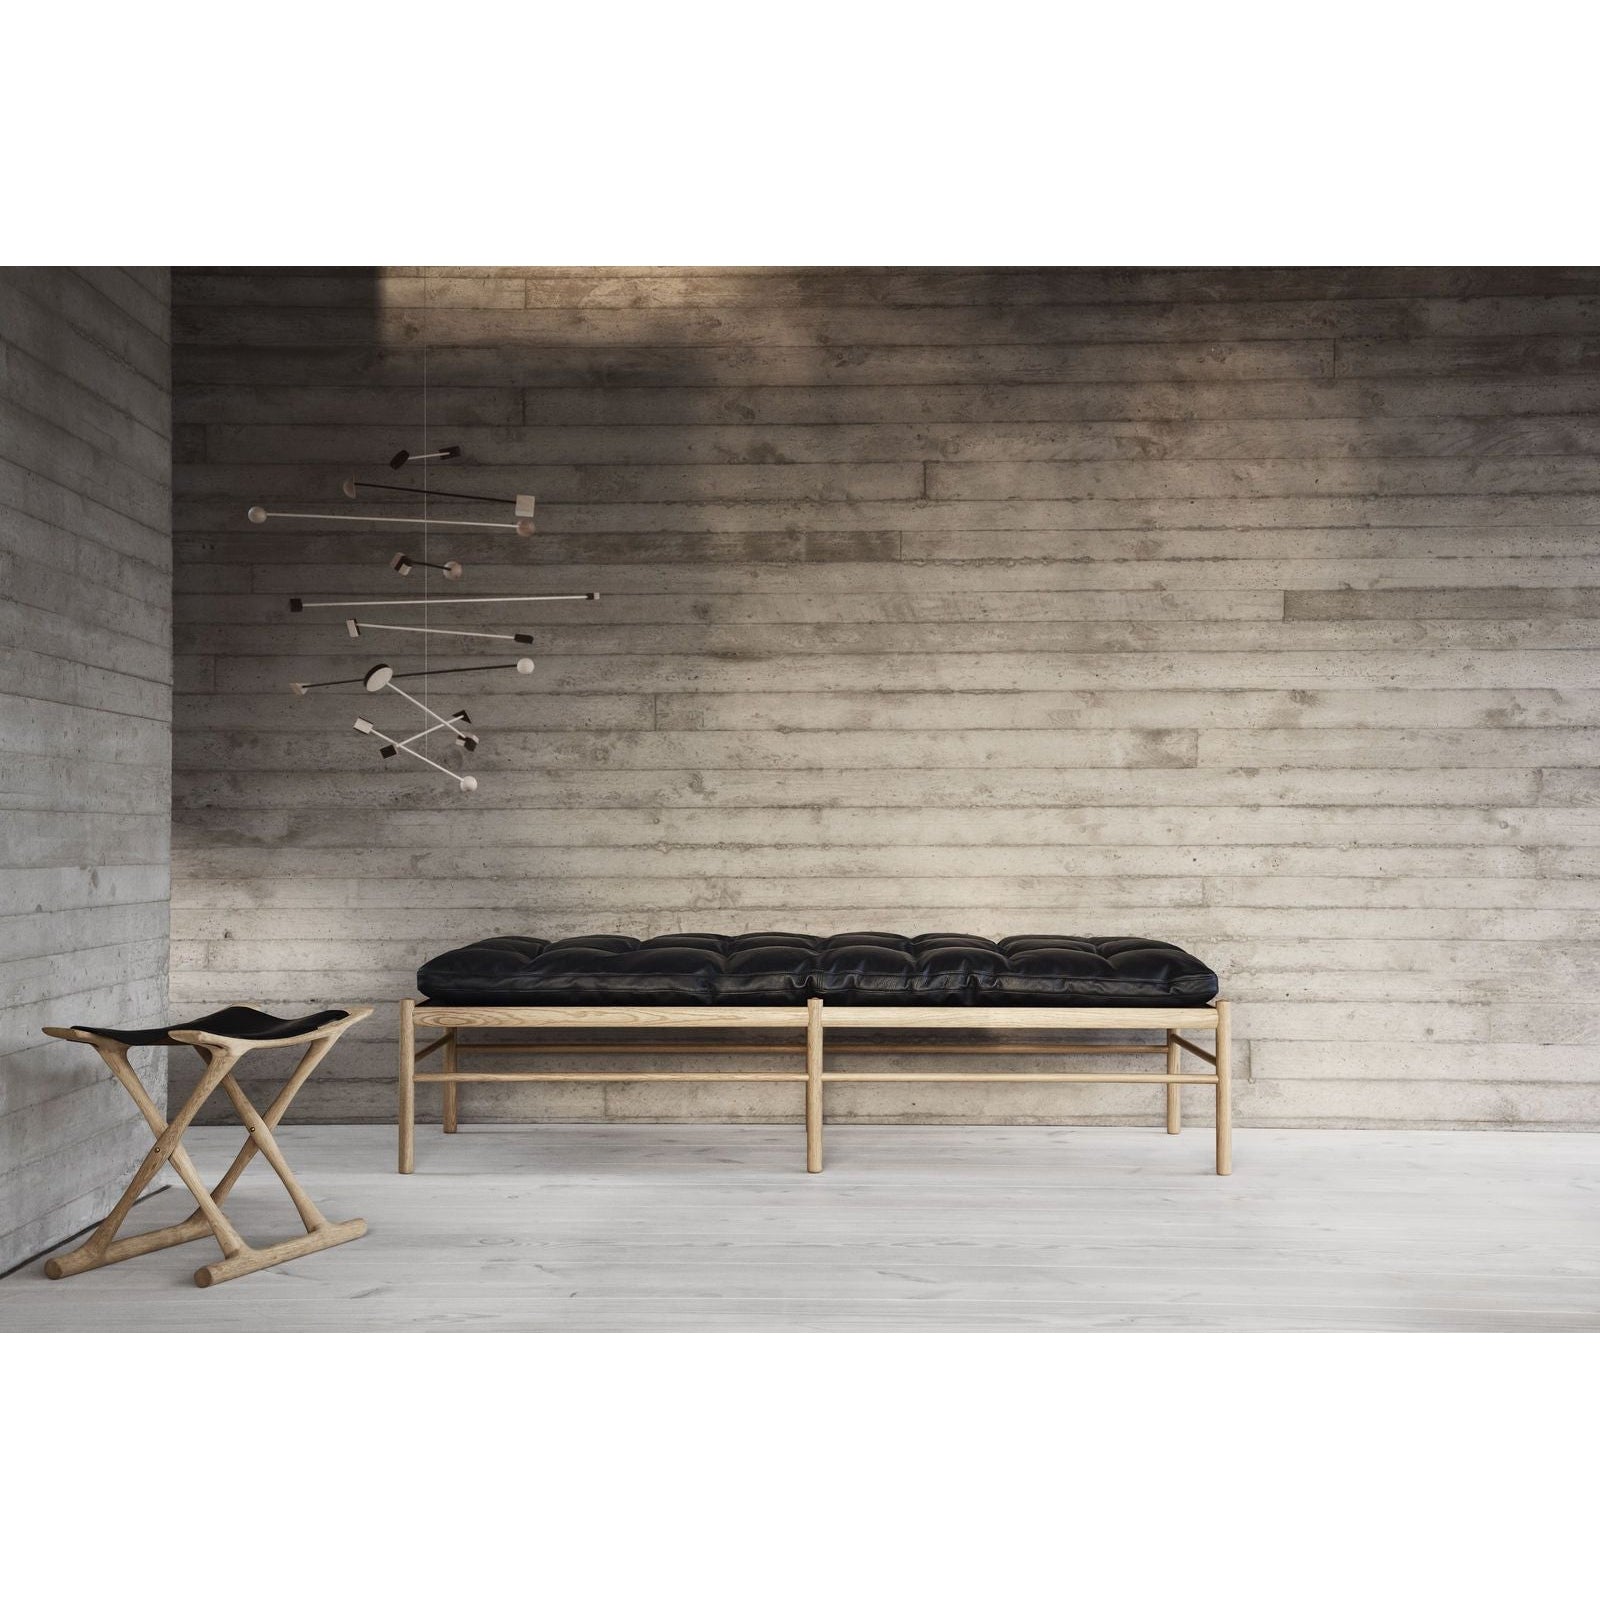 Carl Hansen OW150 Daybed Oiled Oak, Golden Brown Leather